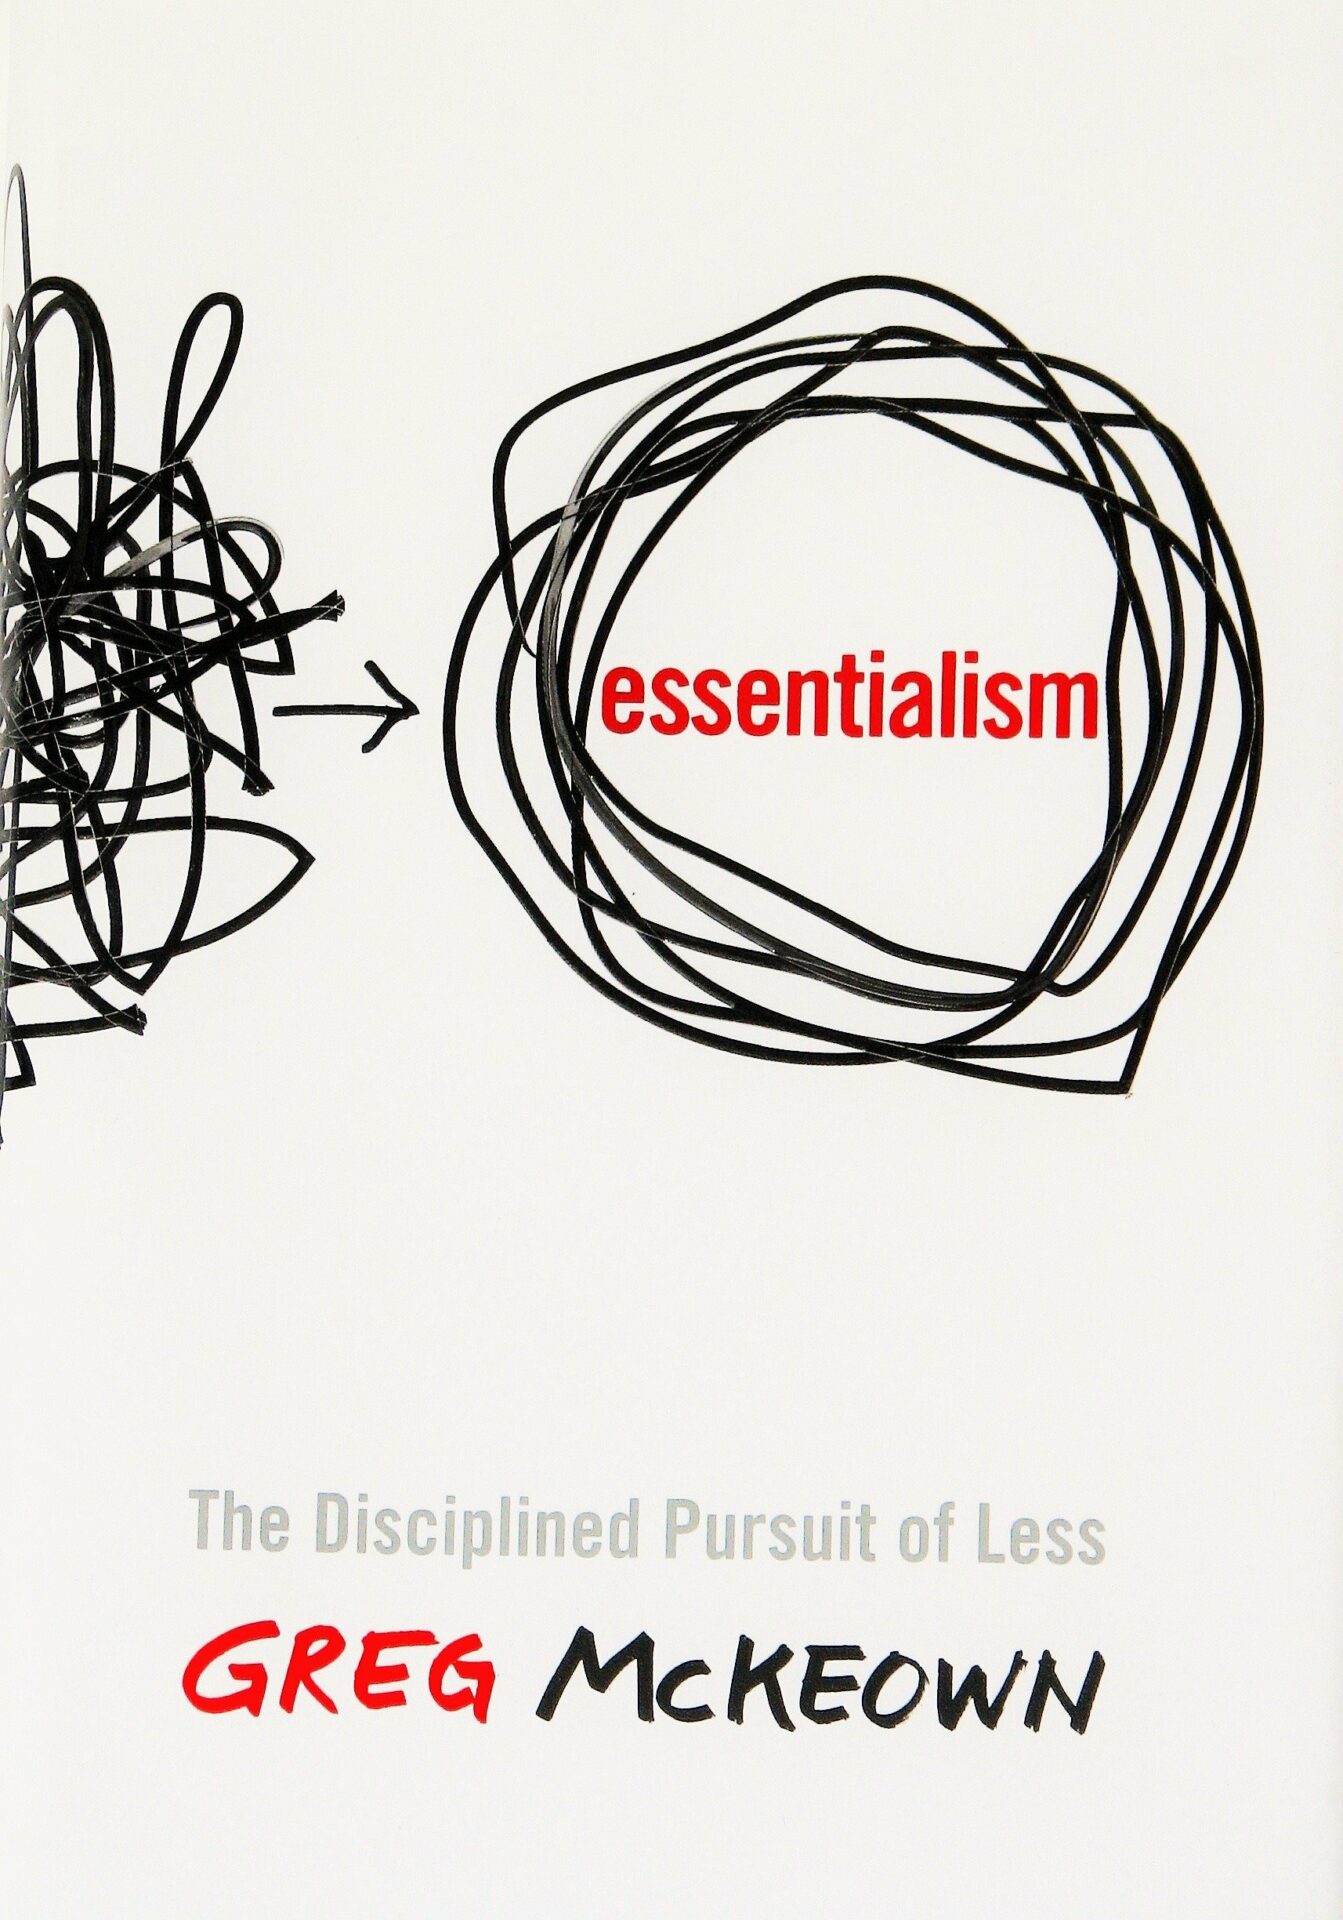 Front cover of the book, "Essentialism", the disciplined pursuit of less written by Greg McKeown.